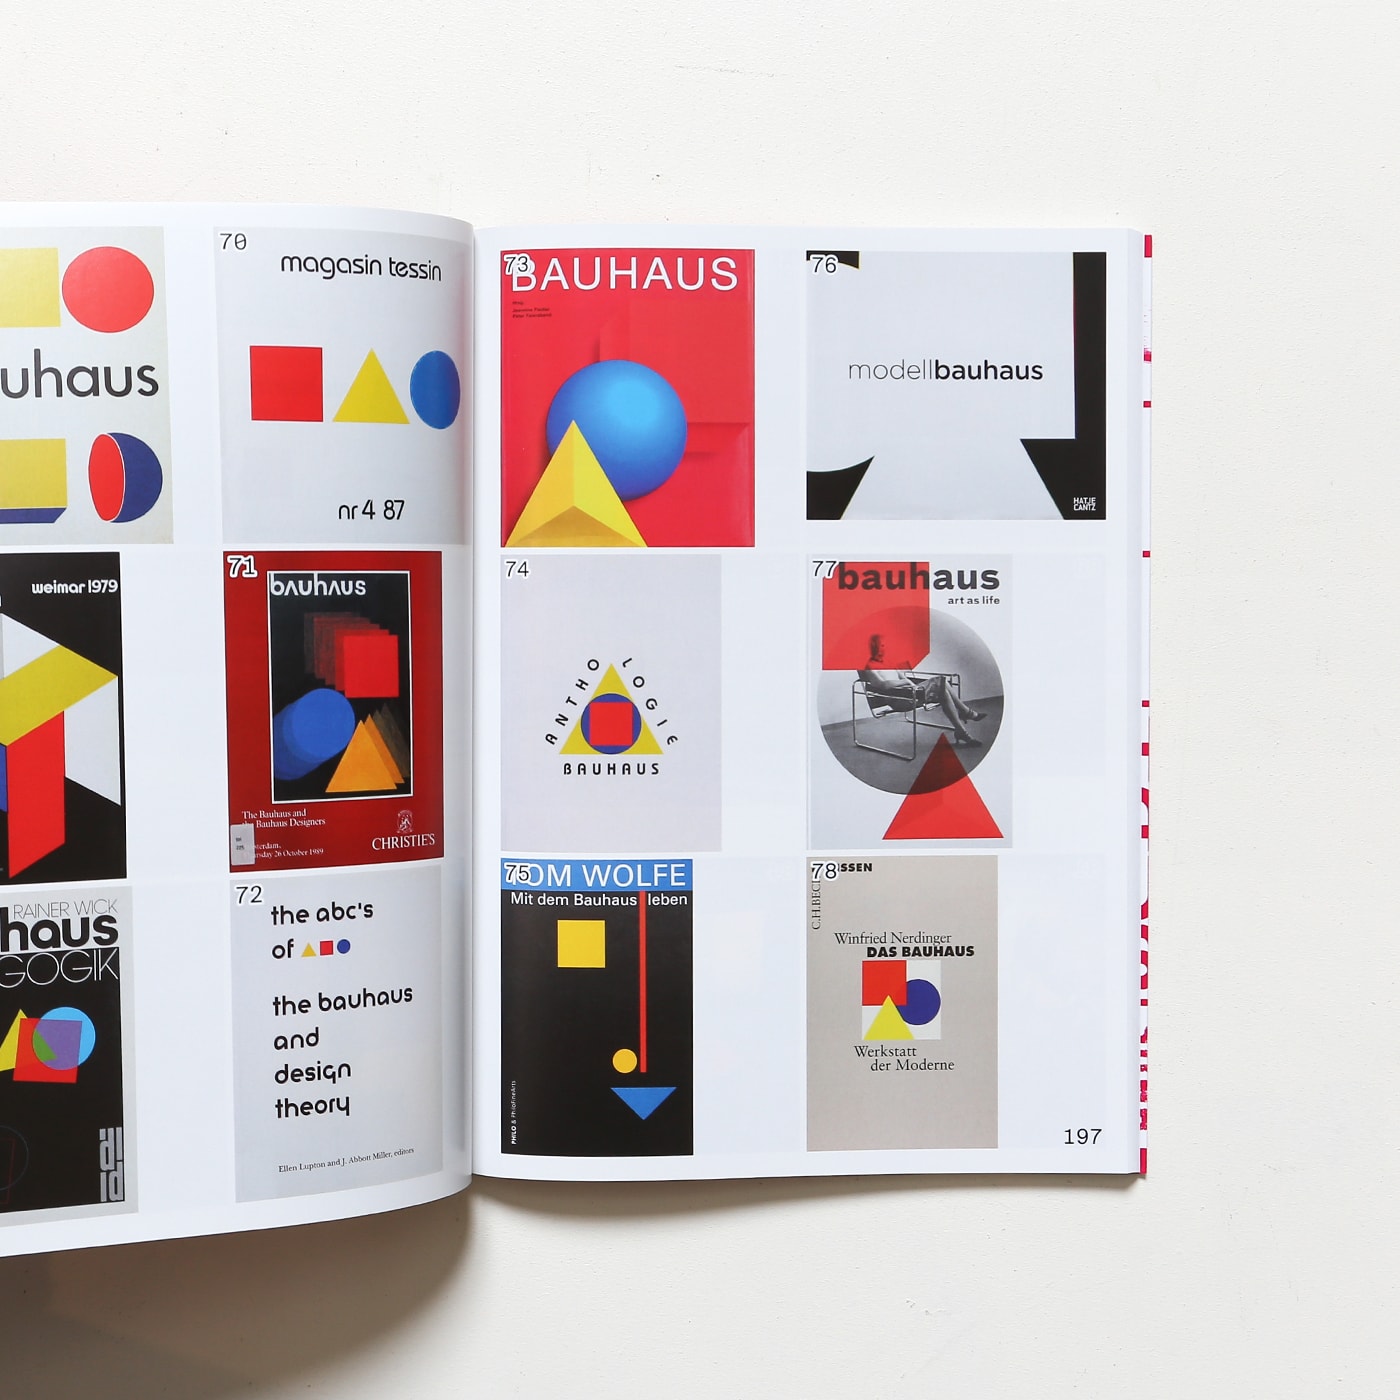 The Bauhaus Brand 1919-2019: The Victory of Iconic Form over Use